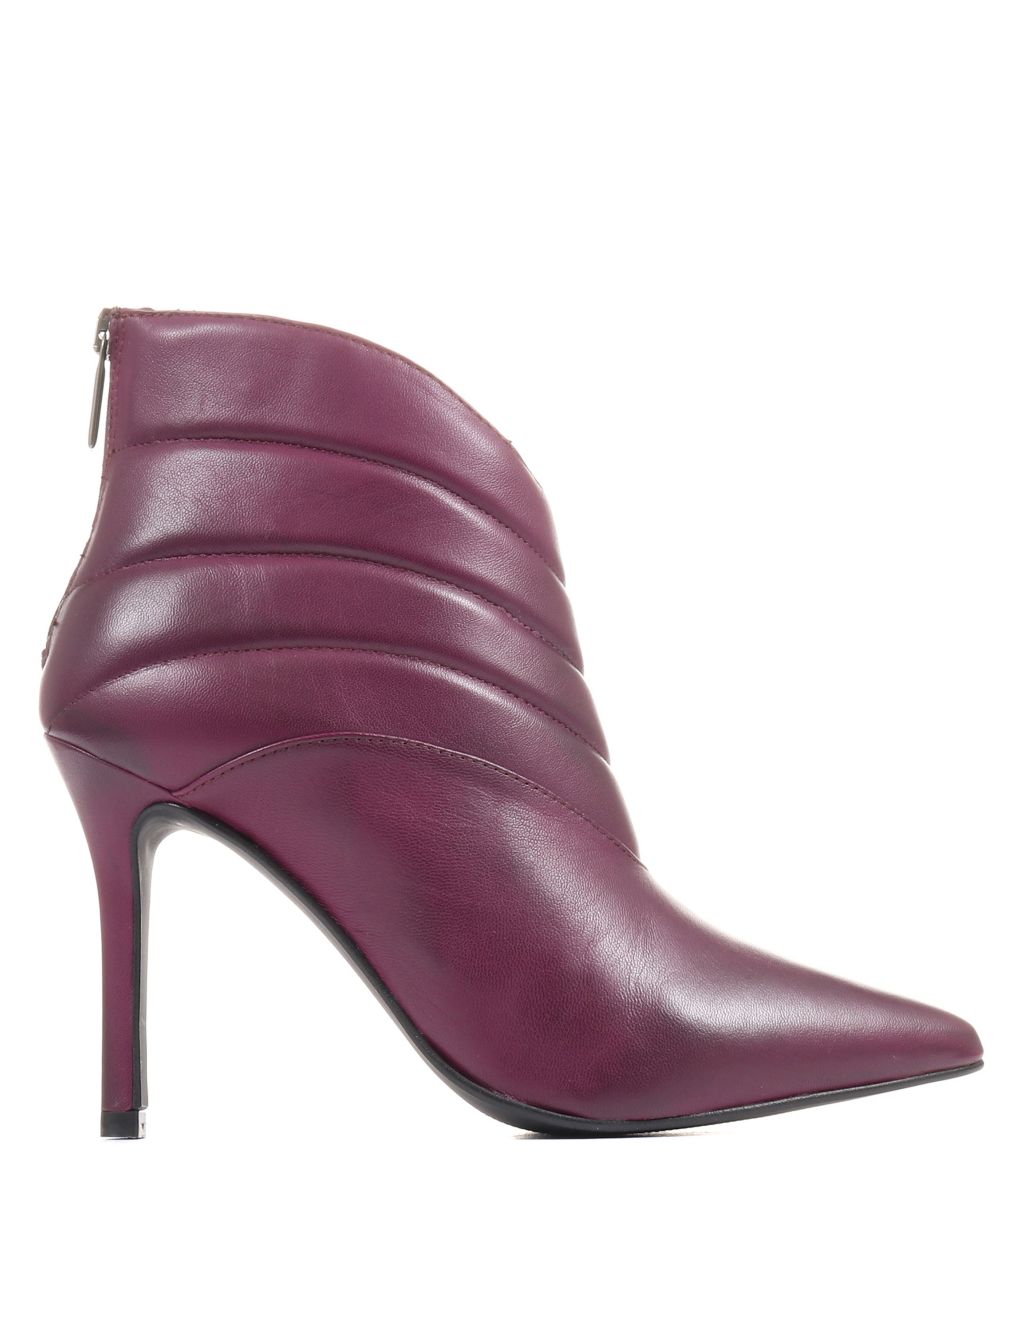 Leather Stiletto Heel Pointed Ankle Boots